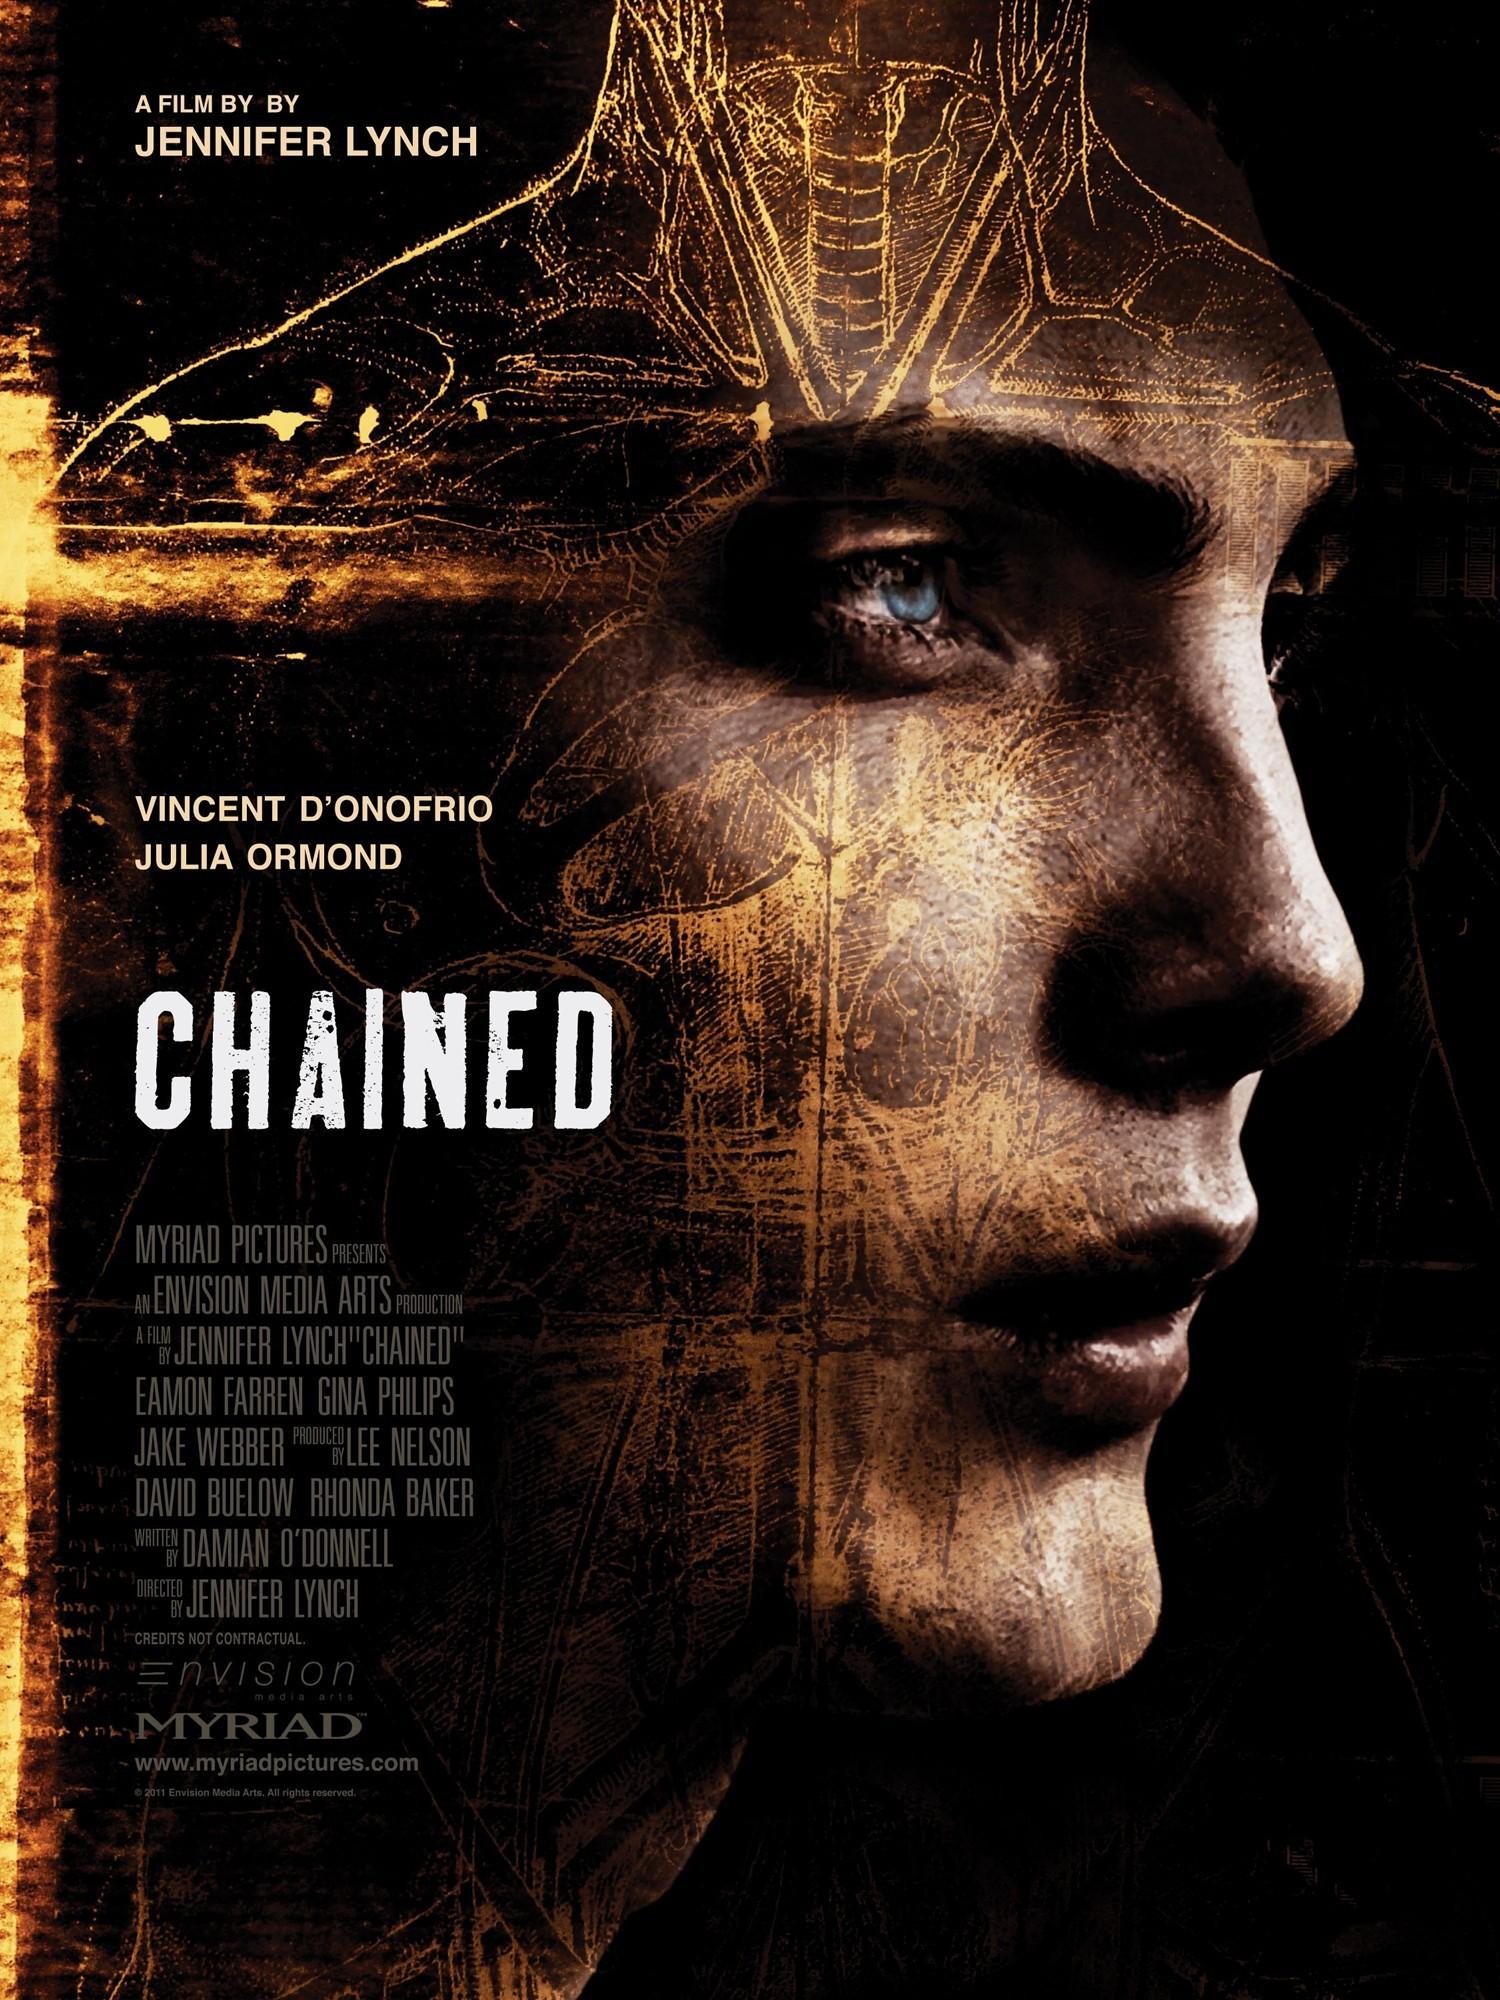 chained-poster03.jpg